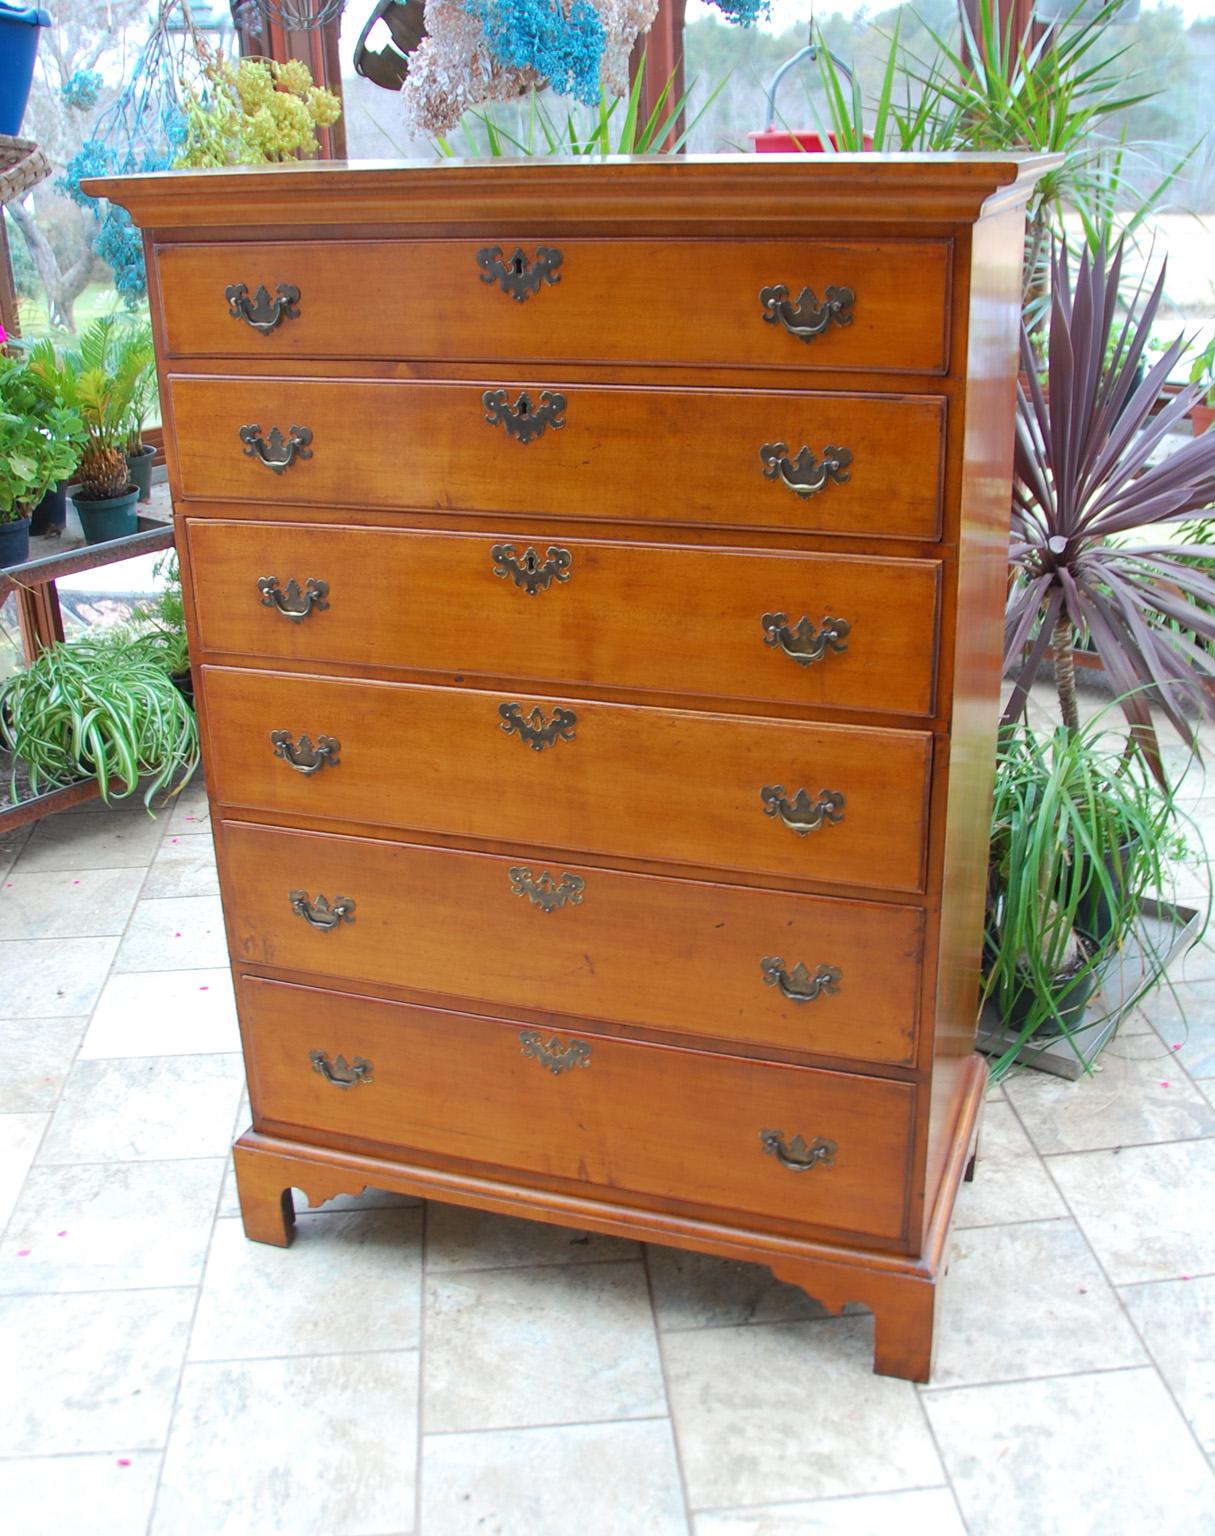 American 18th Century federal period Chippendale tall chest of six graduated drawers in maple. This New England chest is of dovetailed construction, the dovetails that join the top to the sides can be seen in the photos of the top and their precise